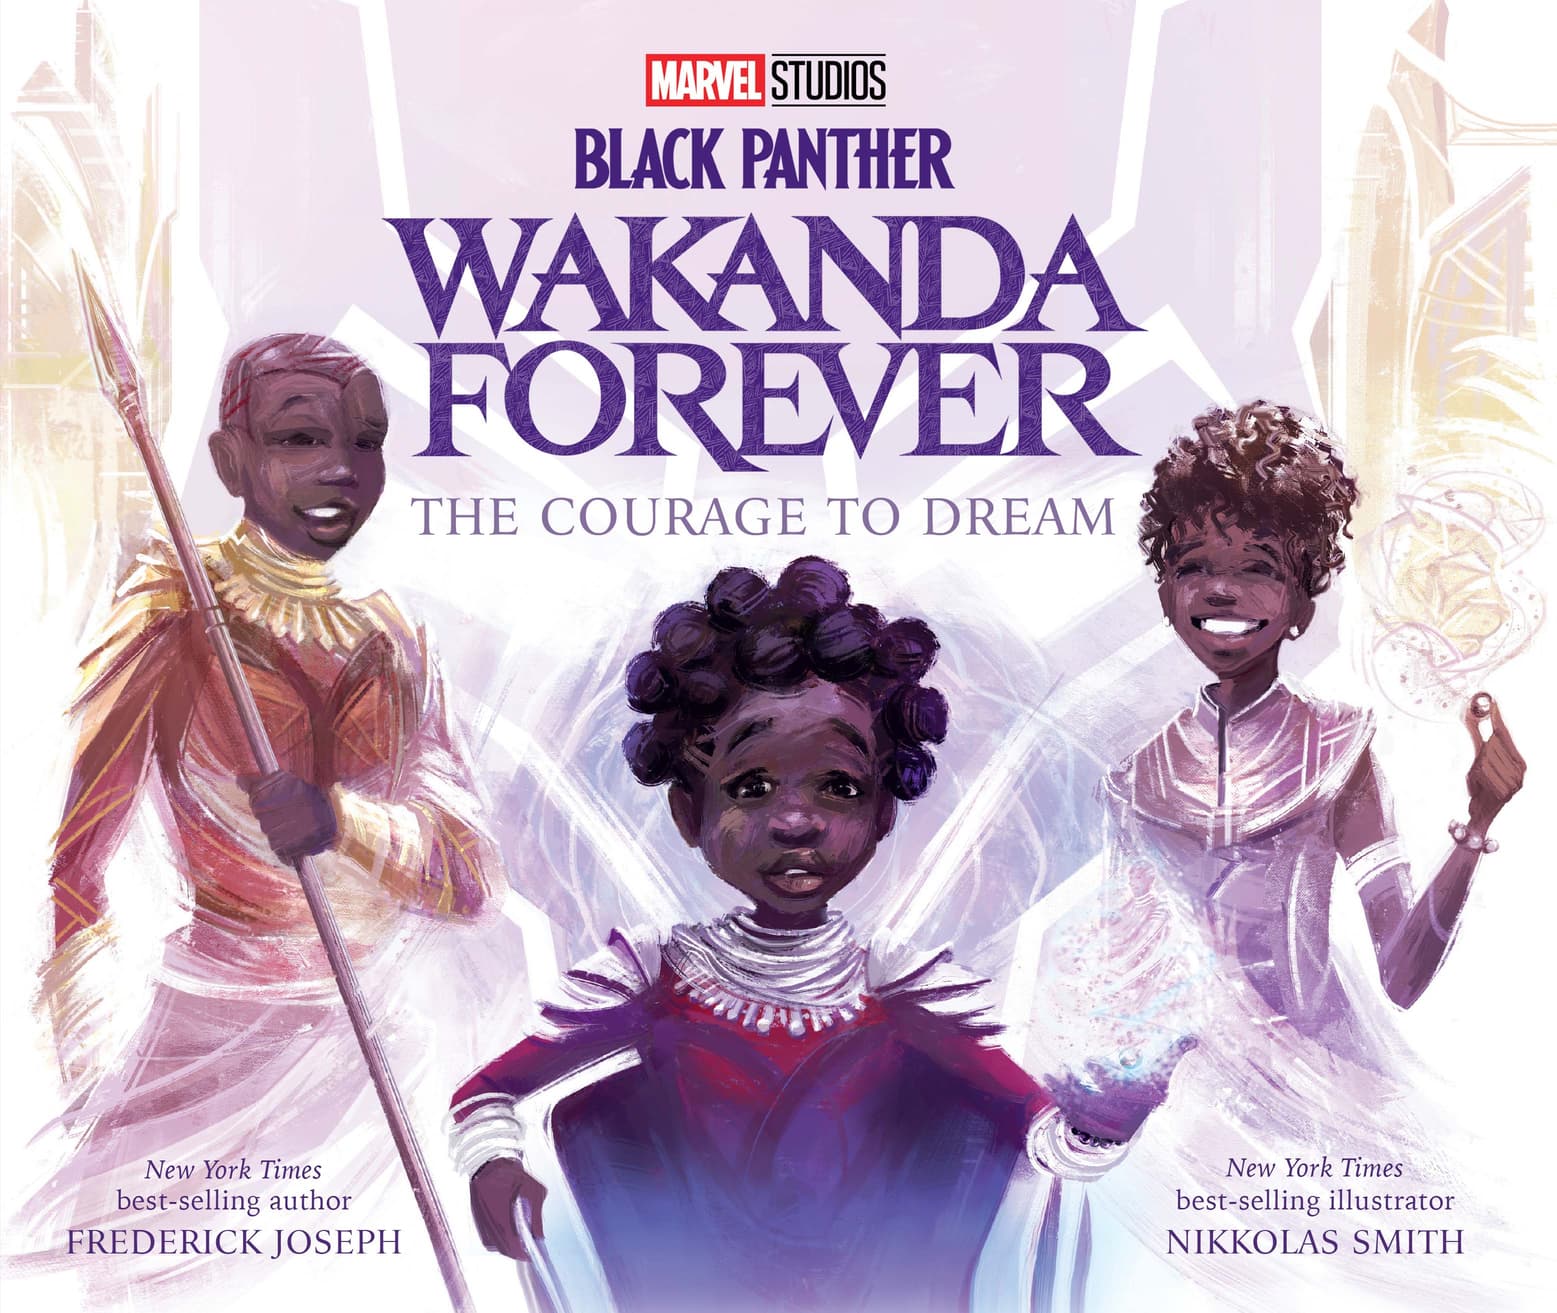 Black Panther: Wakanda Forever – The Courage to Dream Picture Book